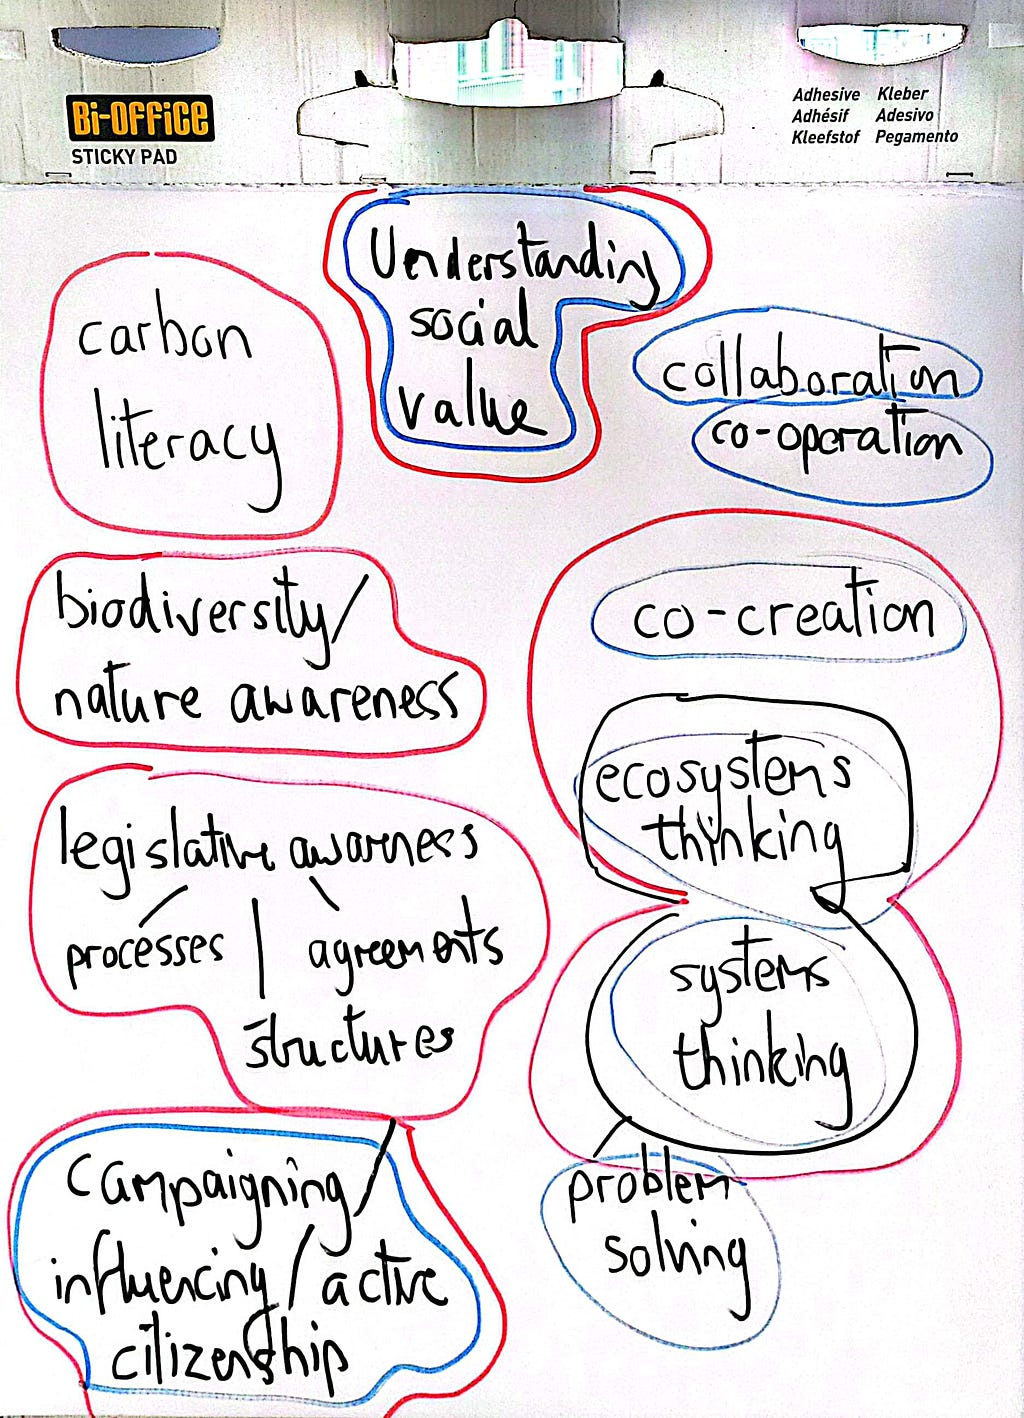 Qualities described in a User Persona within an Education Context.